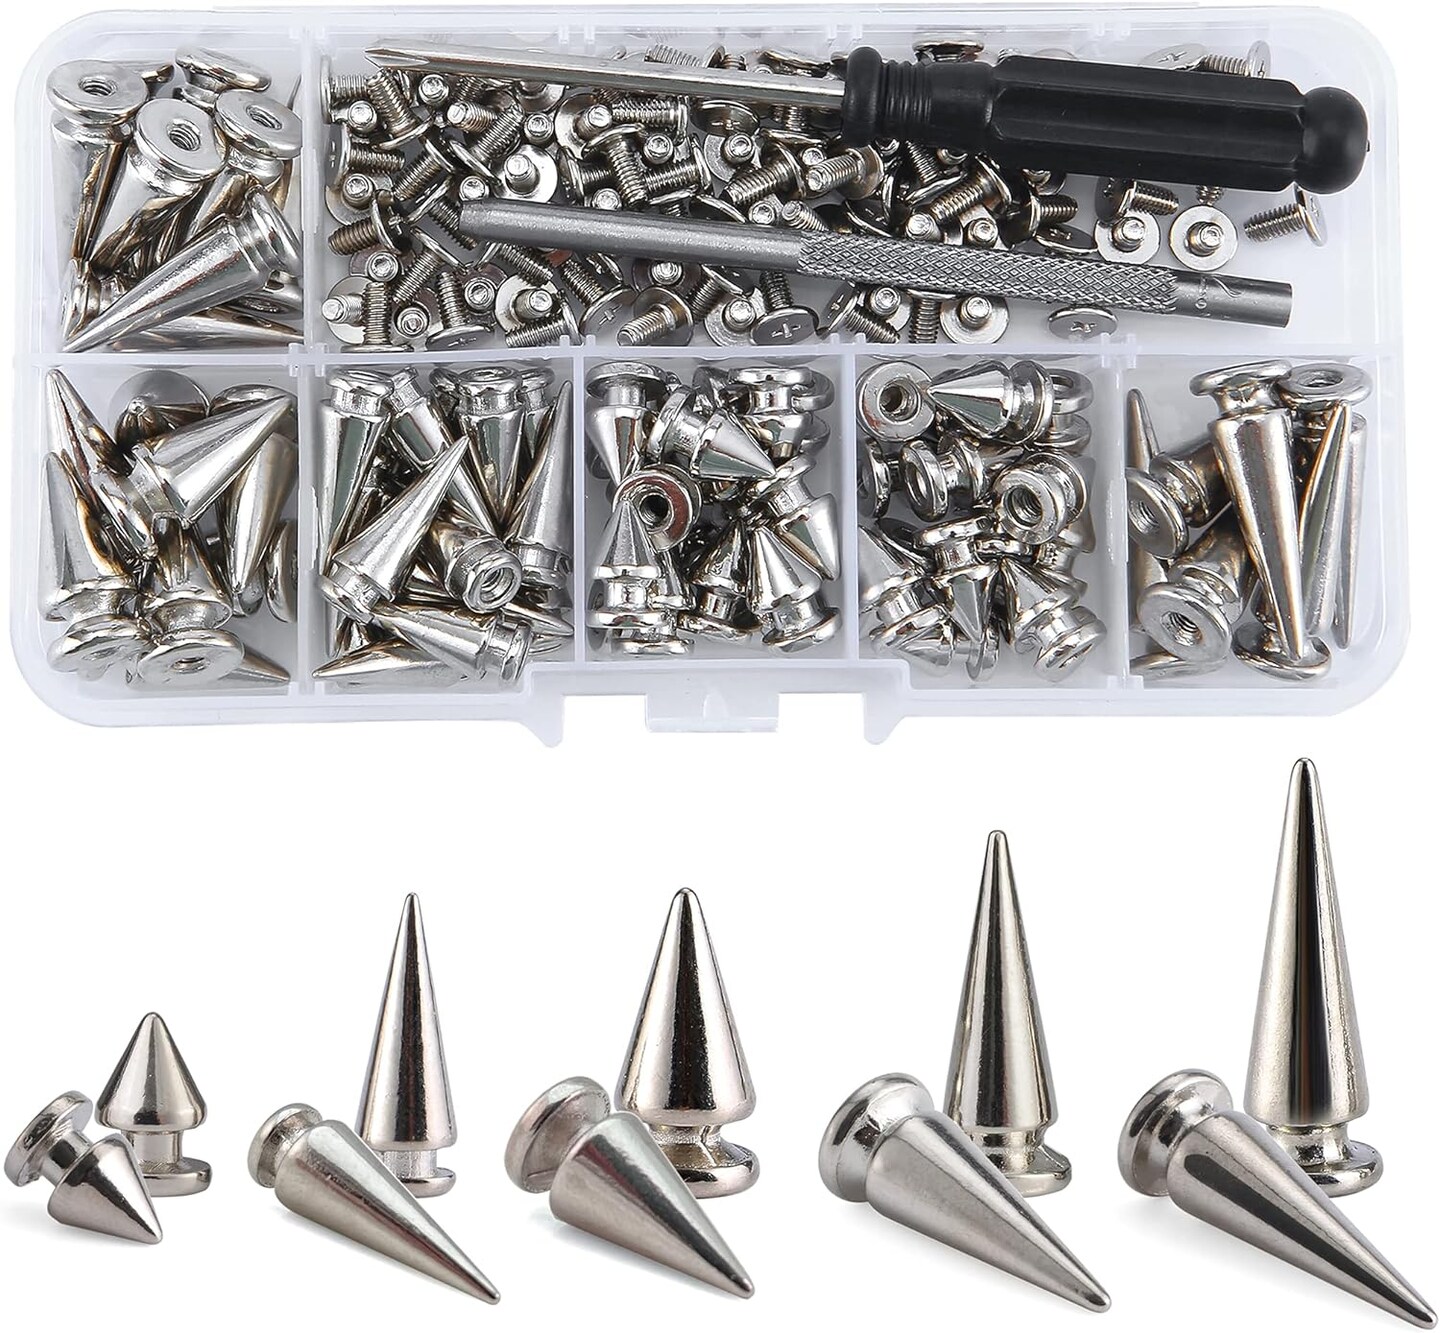 70 Sets Mixed Shape Spikes and Studs Assorted Sizes Spike Studs for Clothing Silver Color Screw Back Bullet Tree Studs and Spikes Rivet for Leather Craft Clothing Shoes Belts Bags Dog Collars